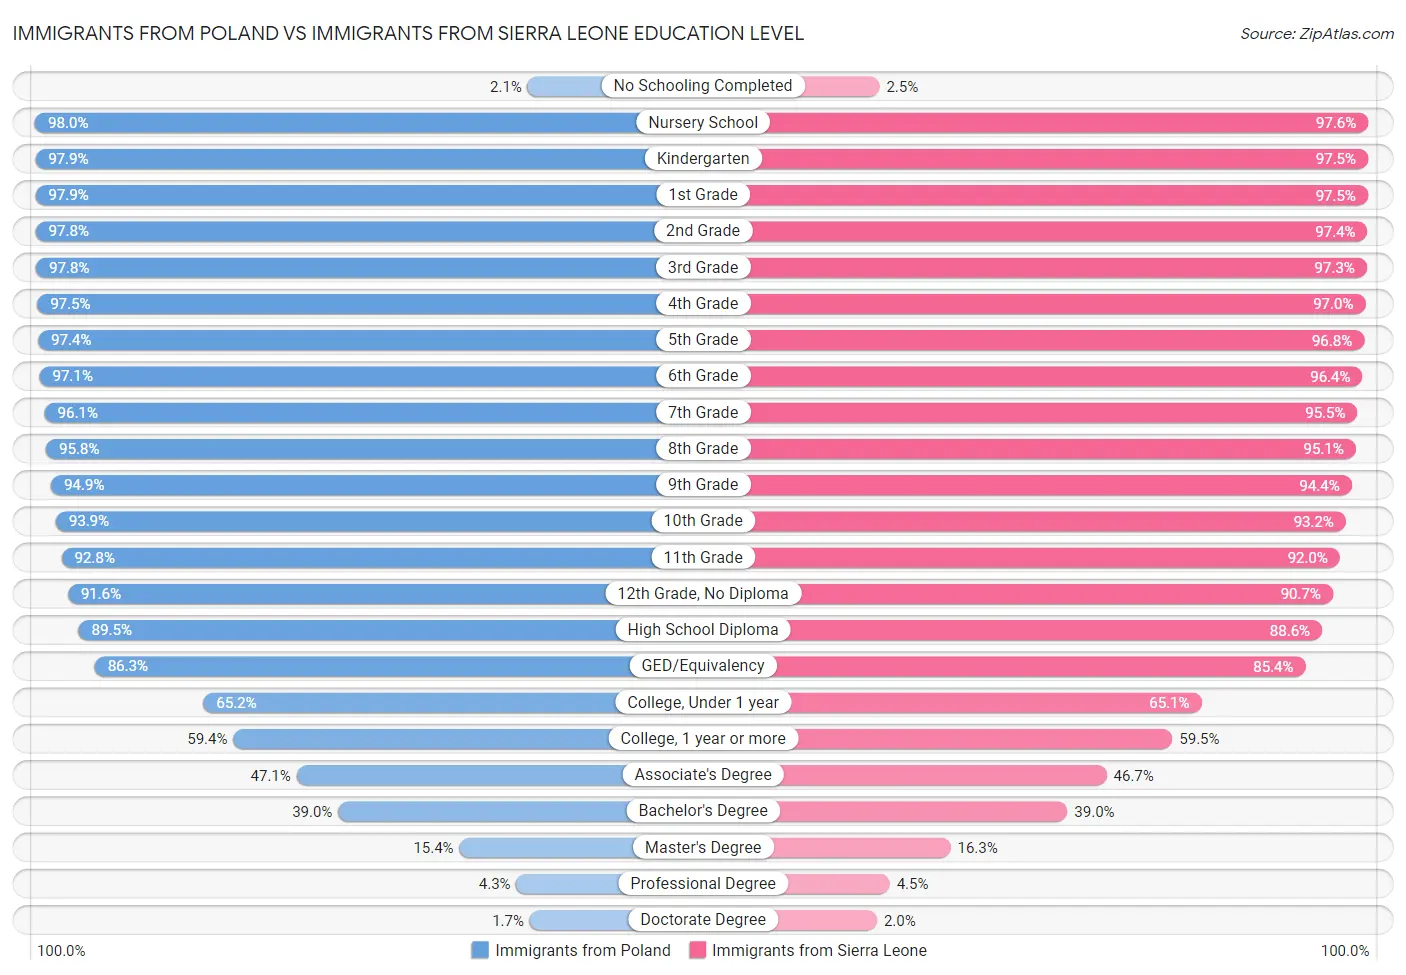 Immigrants from Poland vs Immigrants from Sierra Leone Education Level